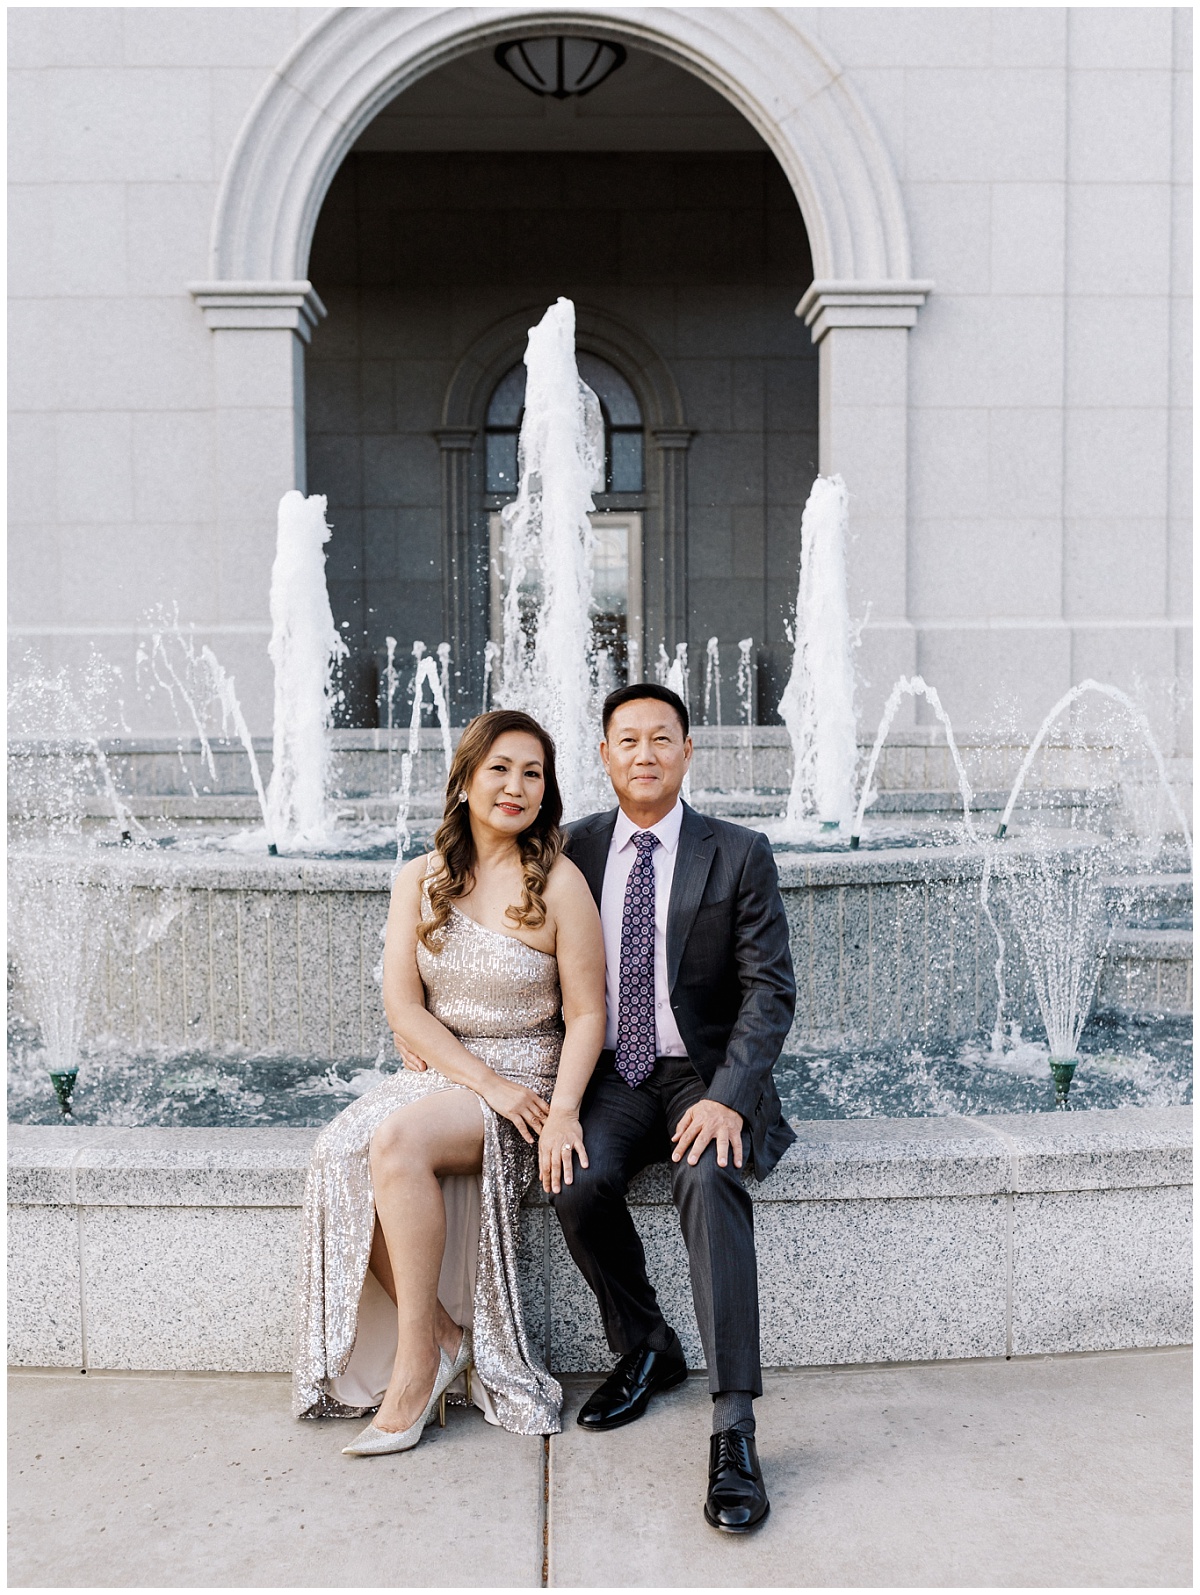 Engagement Photos in front of Fountain